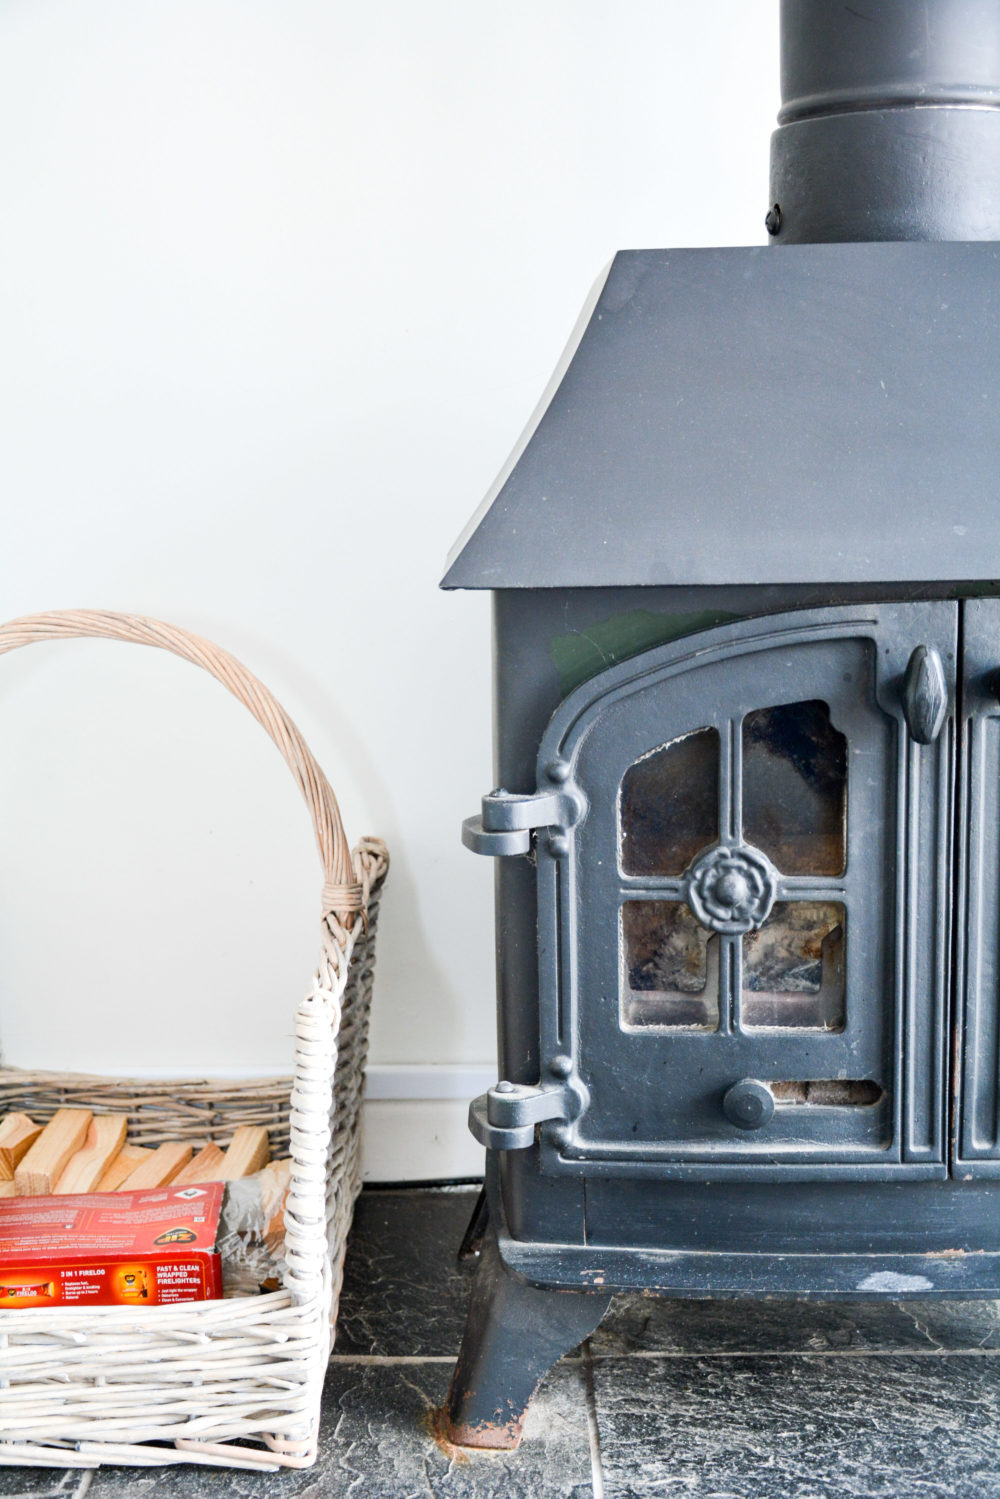 Log burner/fire in living space of 3 bed self catering cottage near winchester